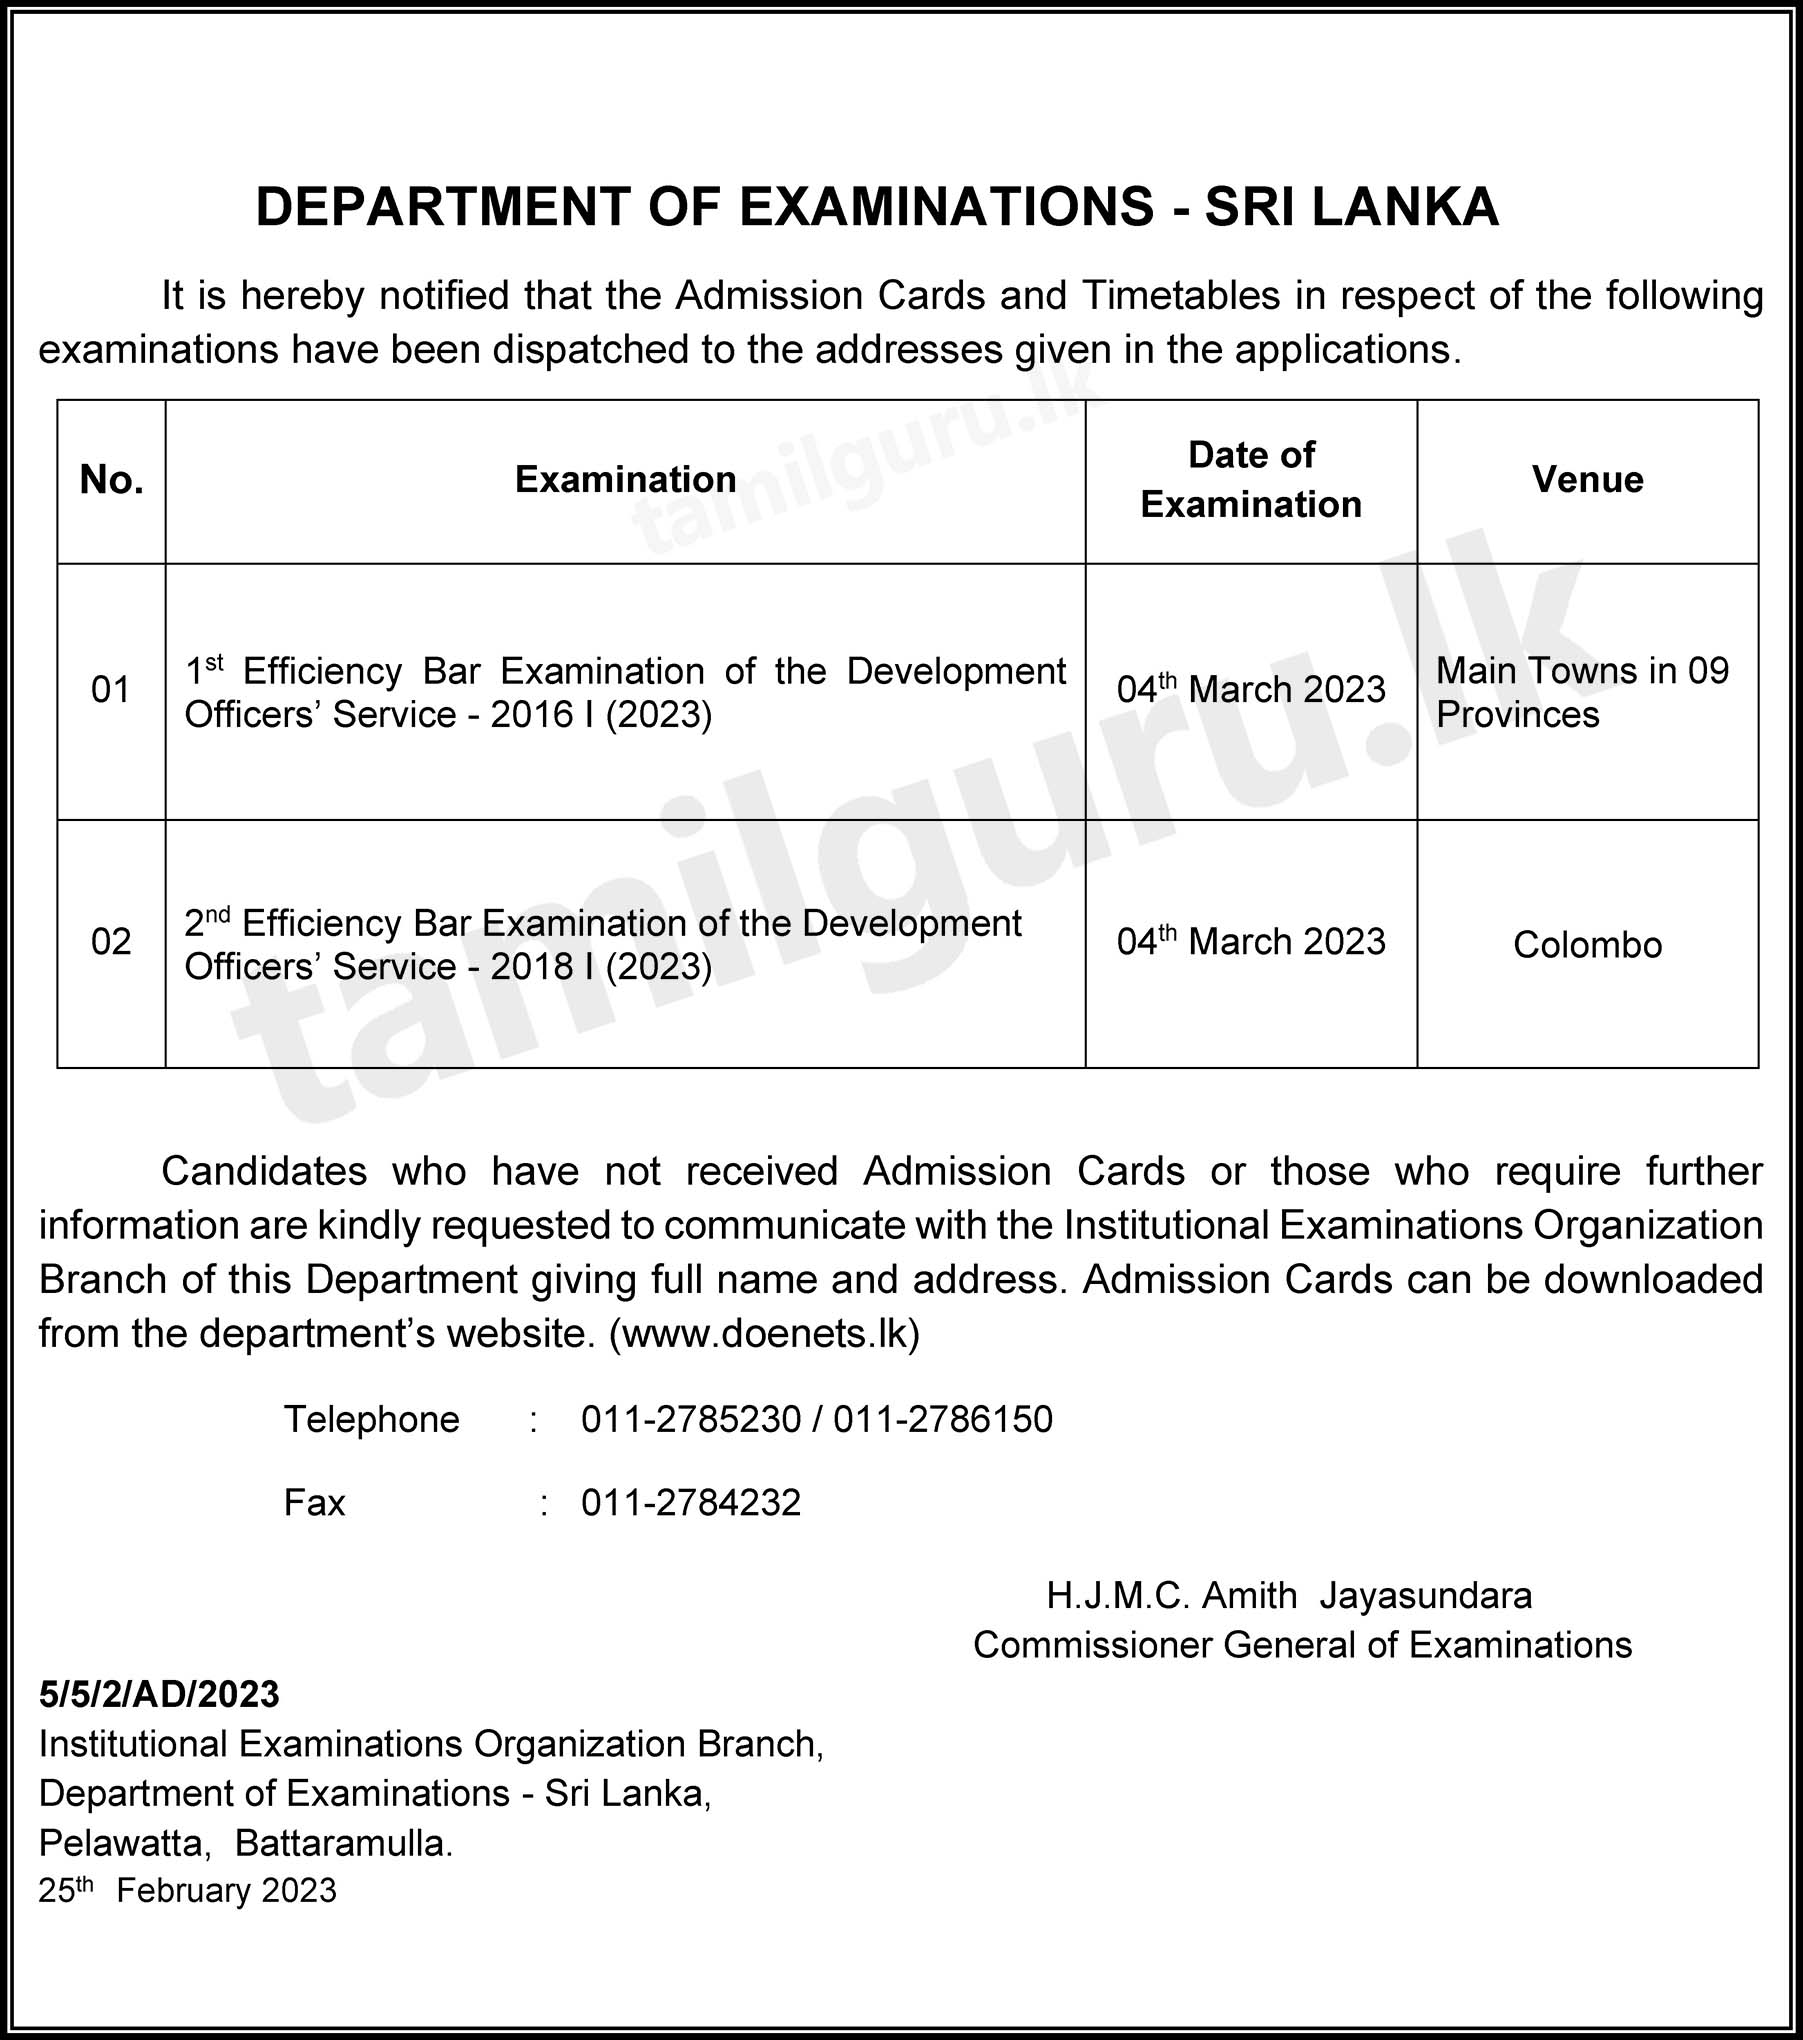 Admission Card - Efficiency Bar (EB) Examination of the Development Officers’ (DO) Service 2023